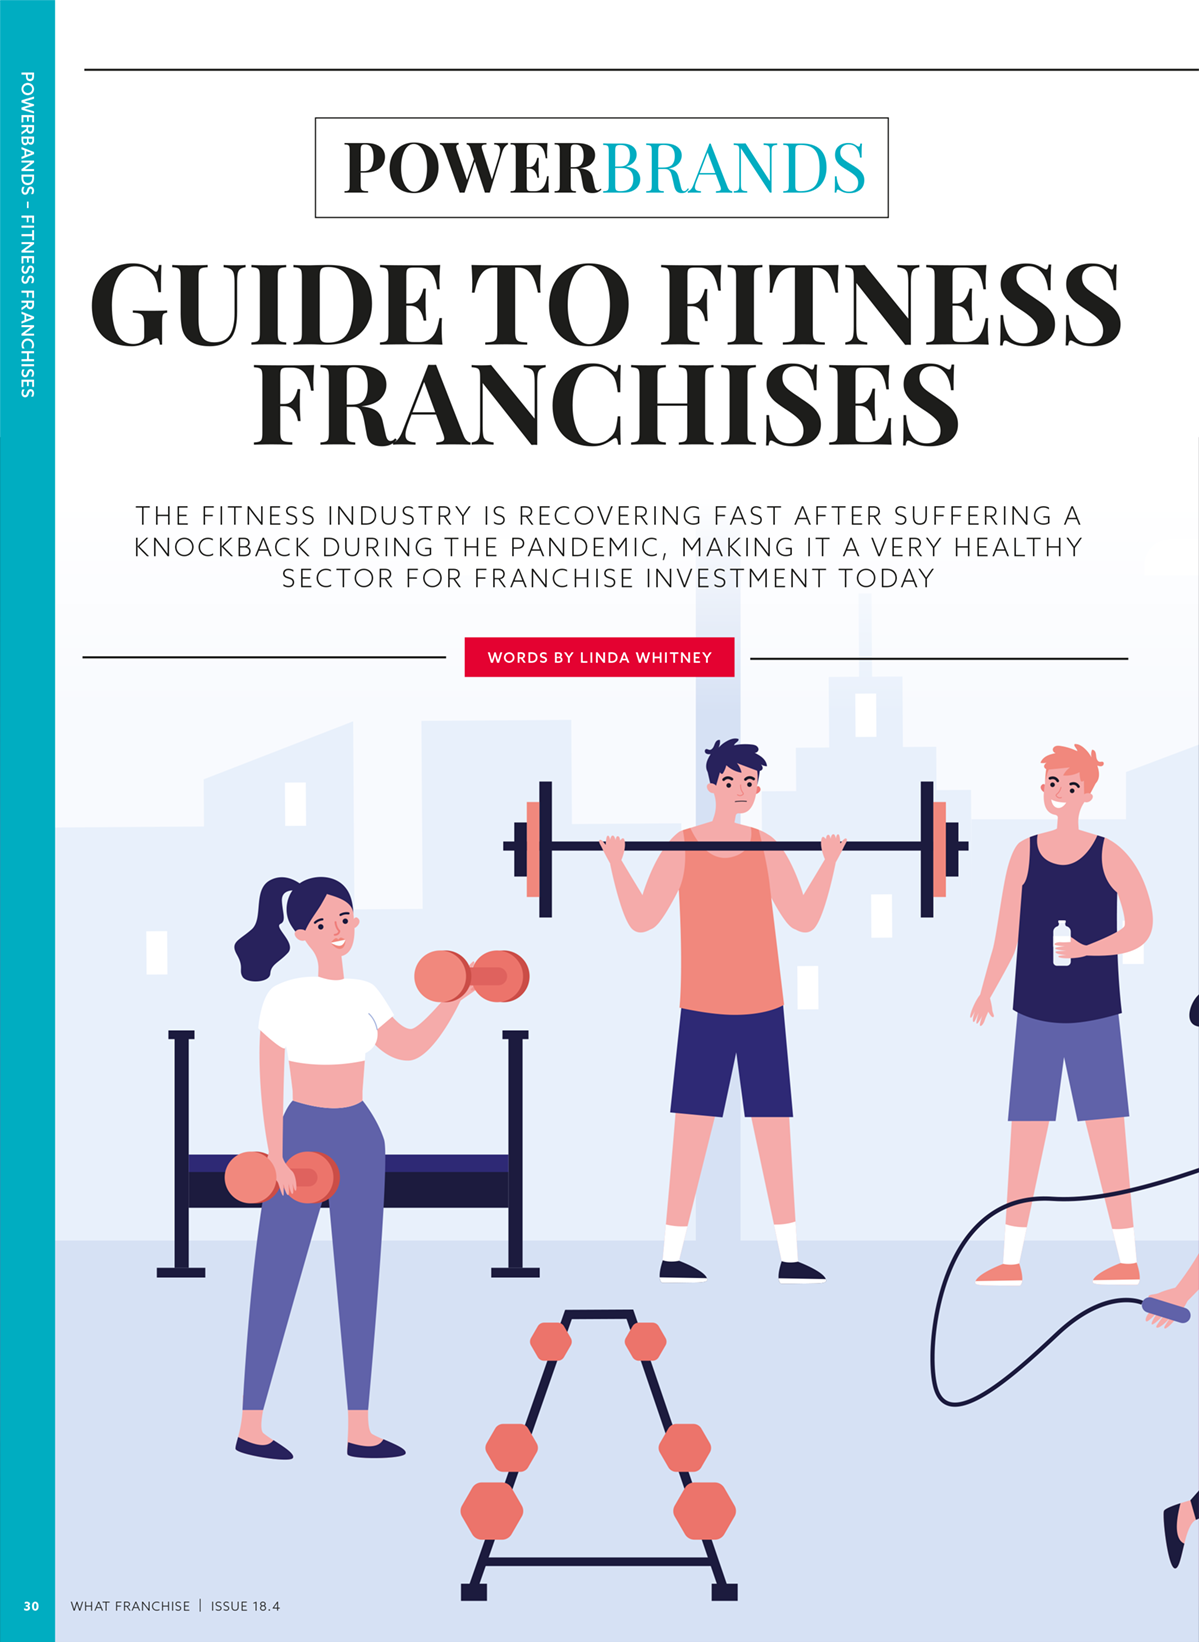 Powerbrands: Guide to Fitness Franchises